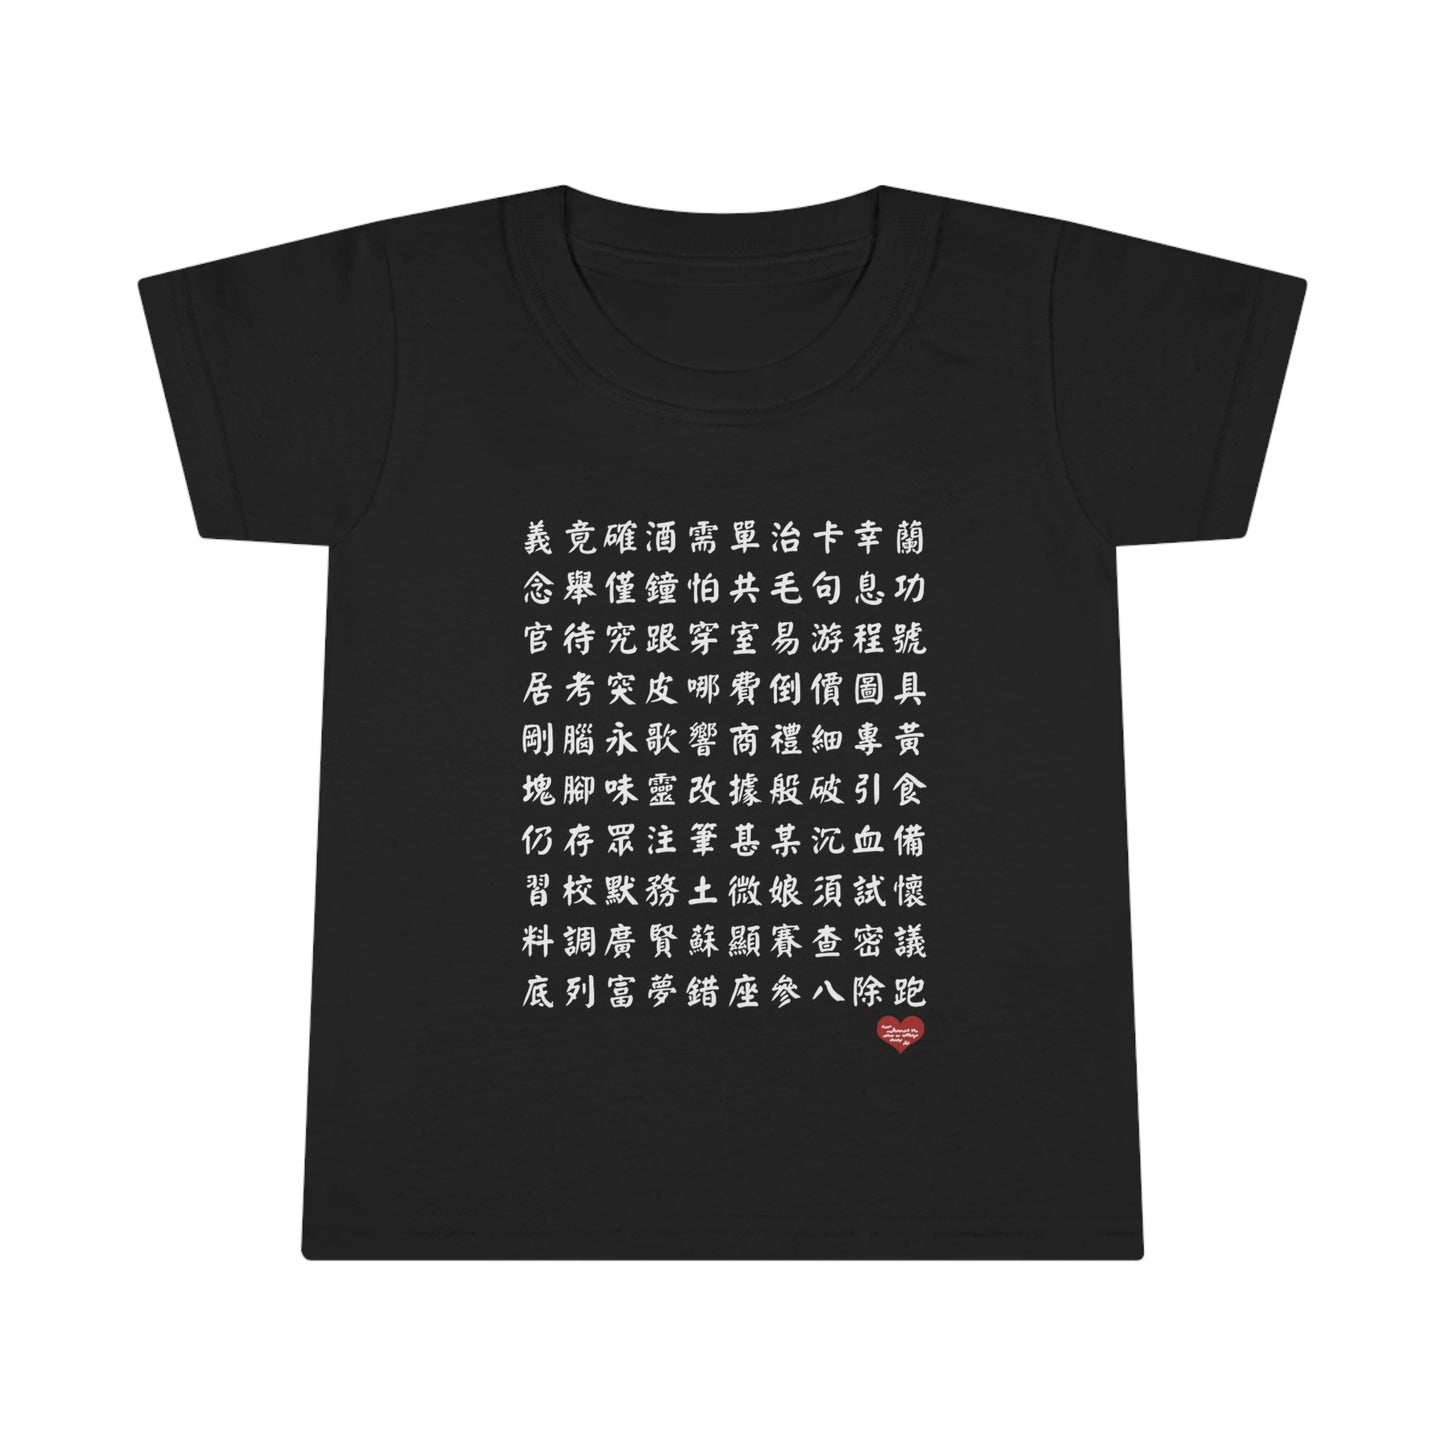 Toddler 1000 Characters Set 6,  1000漢字系列 #6 Color Block T-shirts